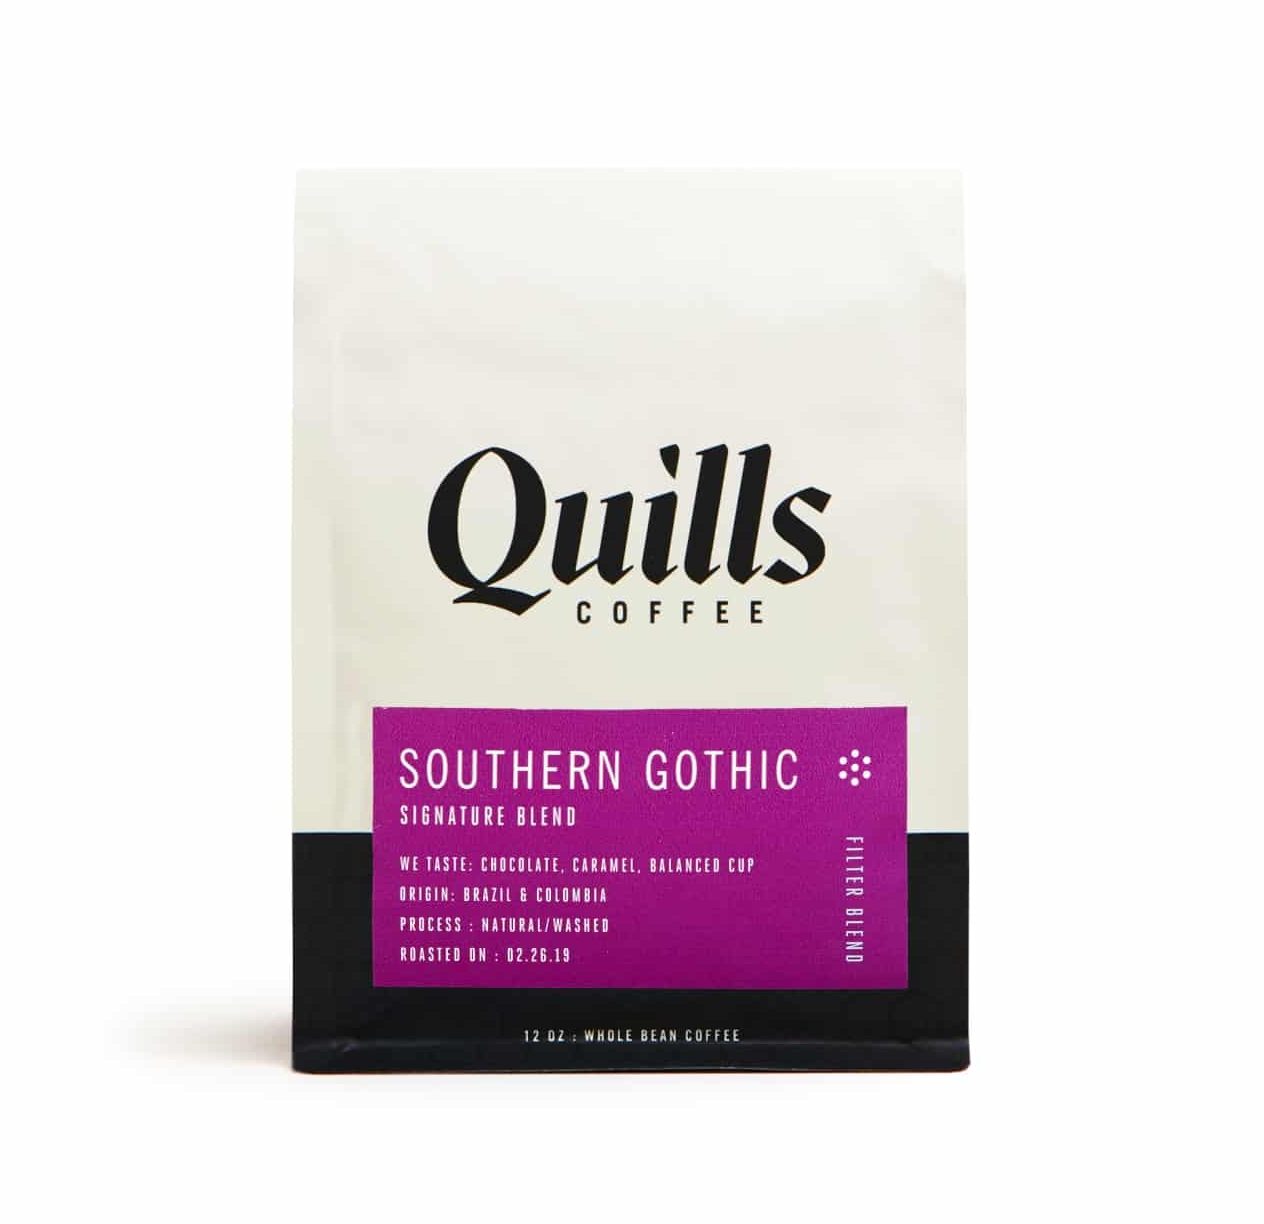 Quills coffee